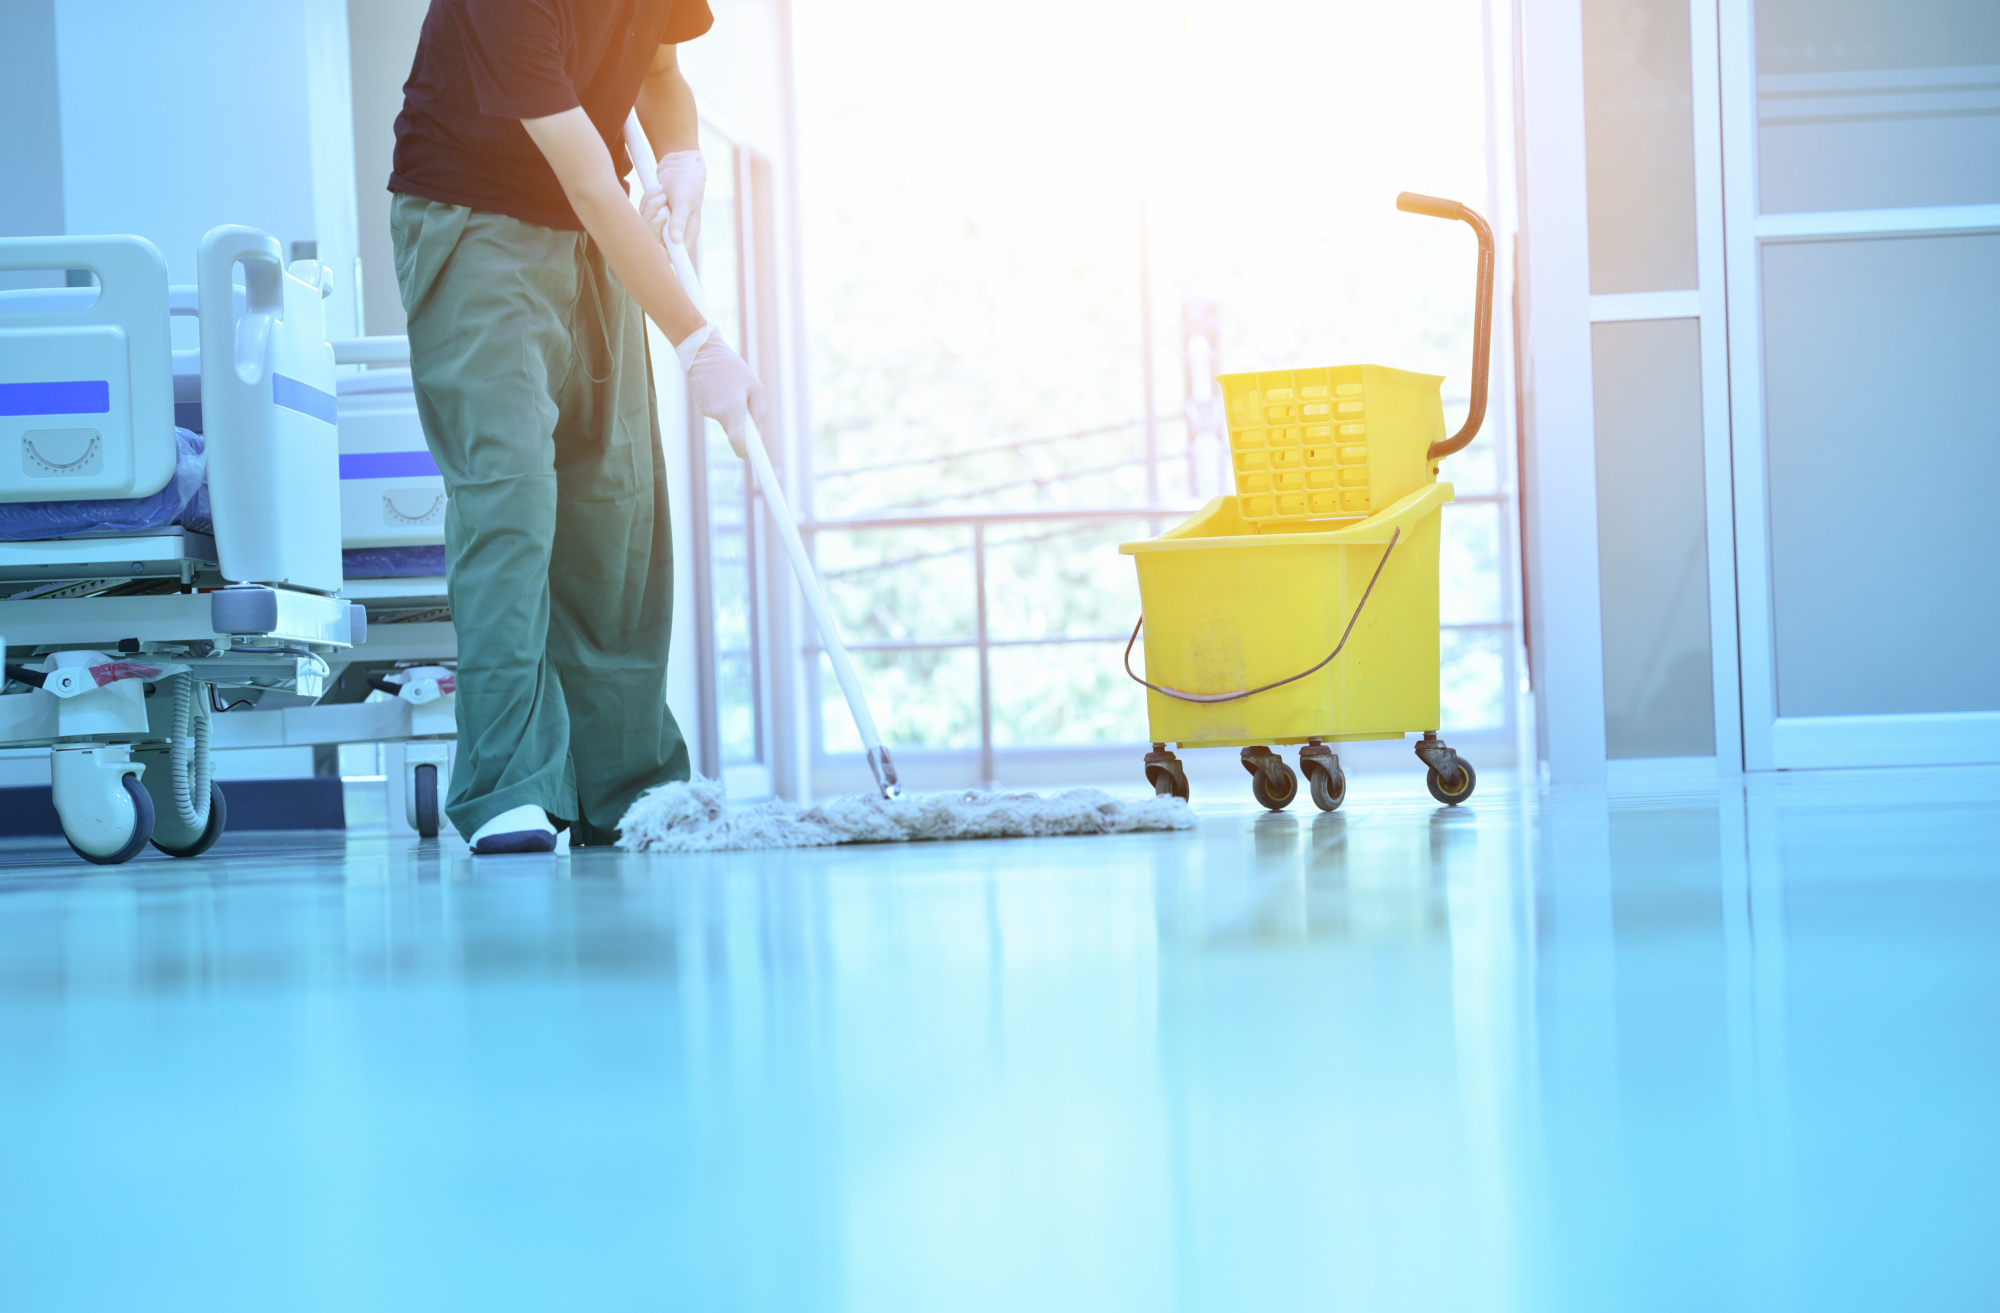 BCC appeals that Cleaning staff must be considered as ‘critical or key workers’